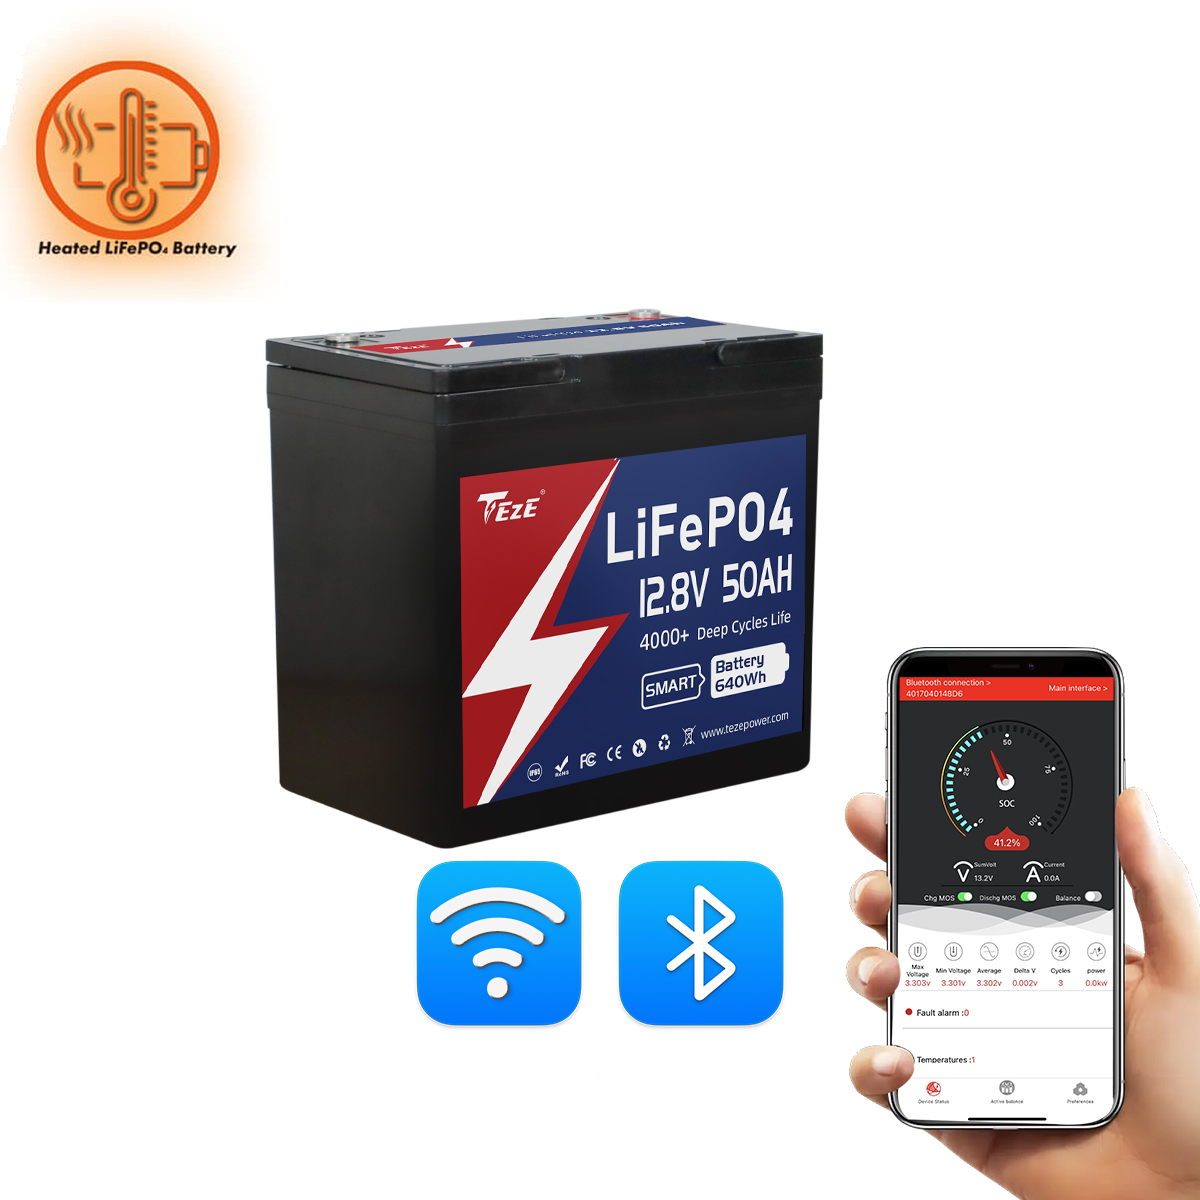 New Add WiFi-TezePower 12V 50Ah LiFePO4 Battery with WIFI and Bluetooth, Self-heating and Active Balancer, Built-in 50A Daly BMS(WIFI Built-in Version)